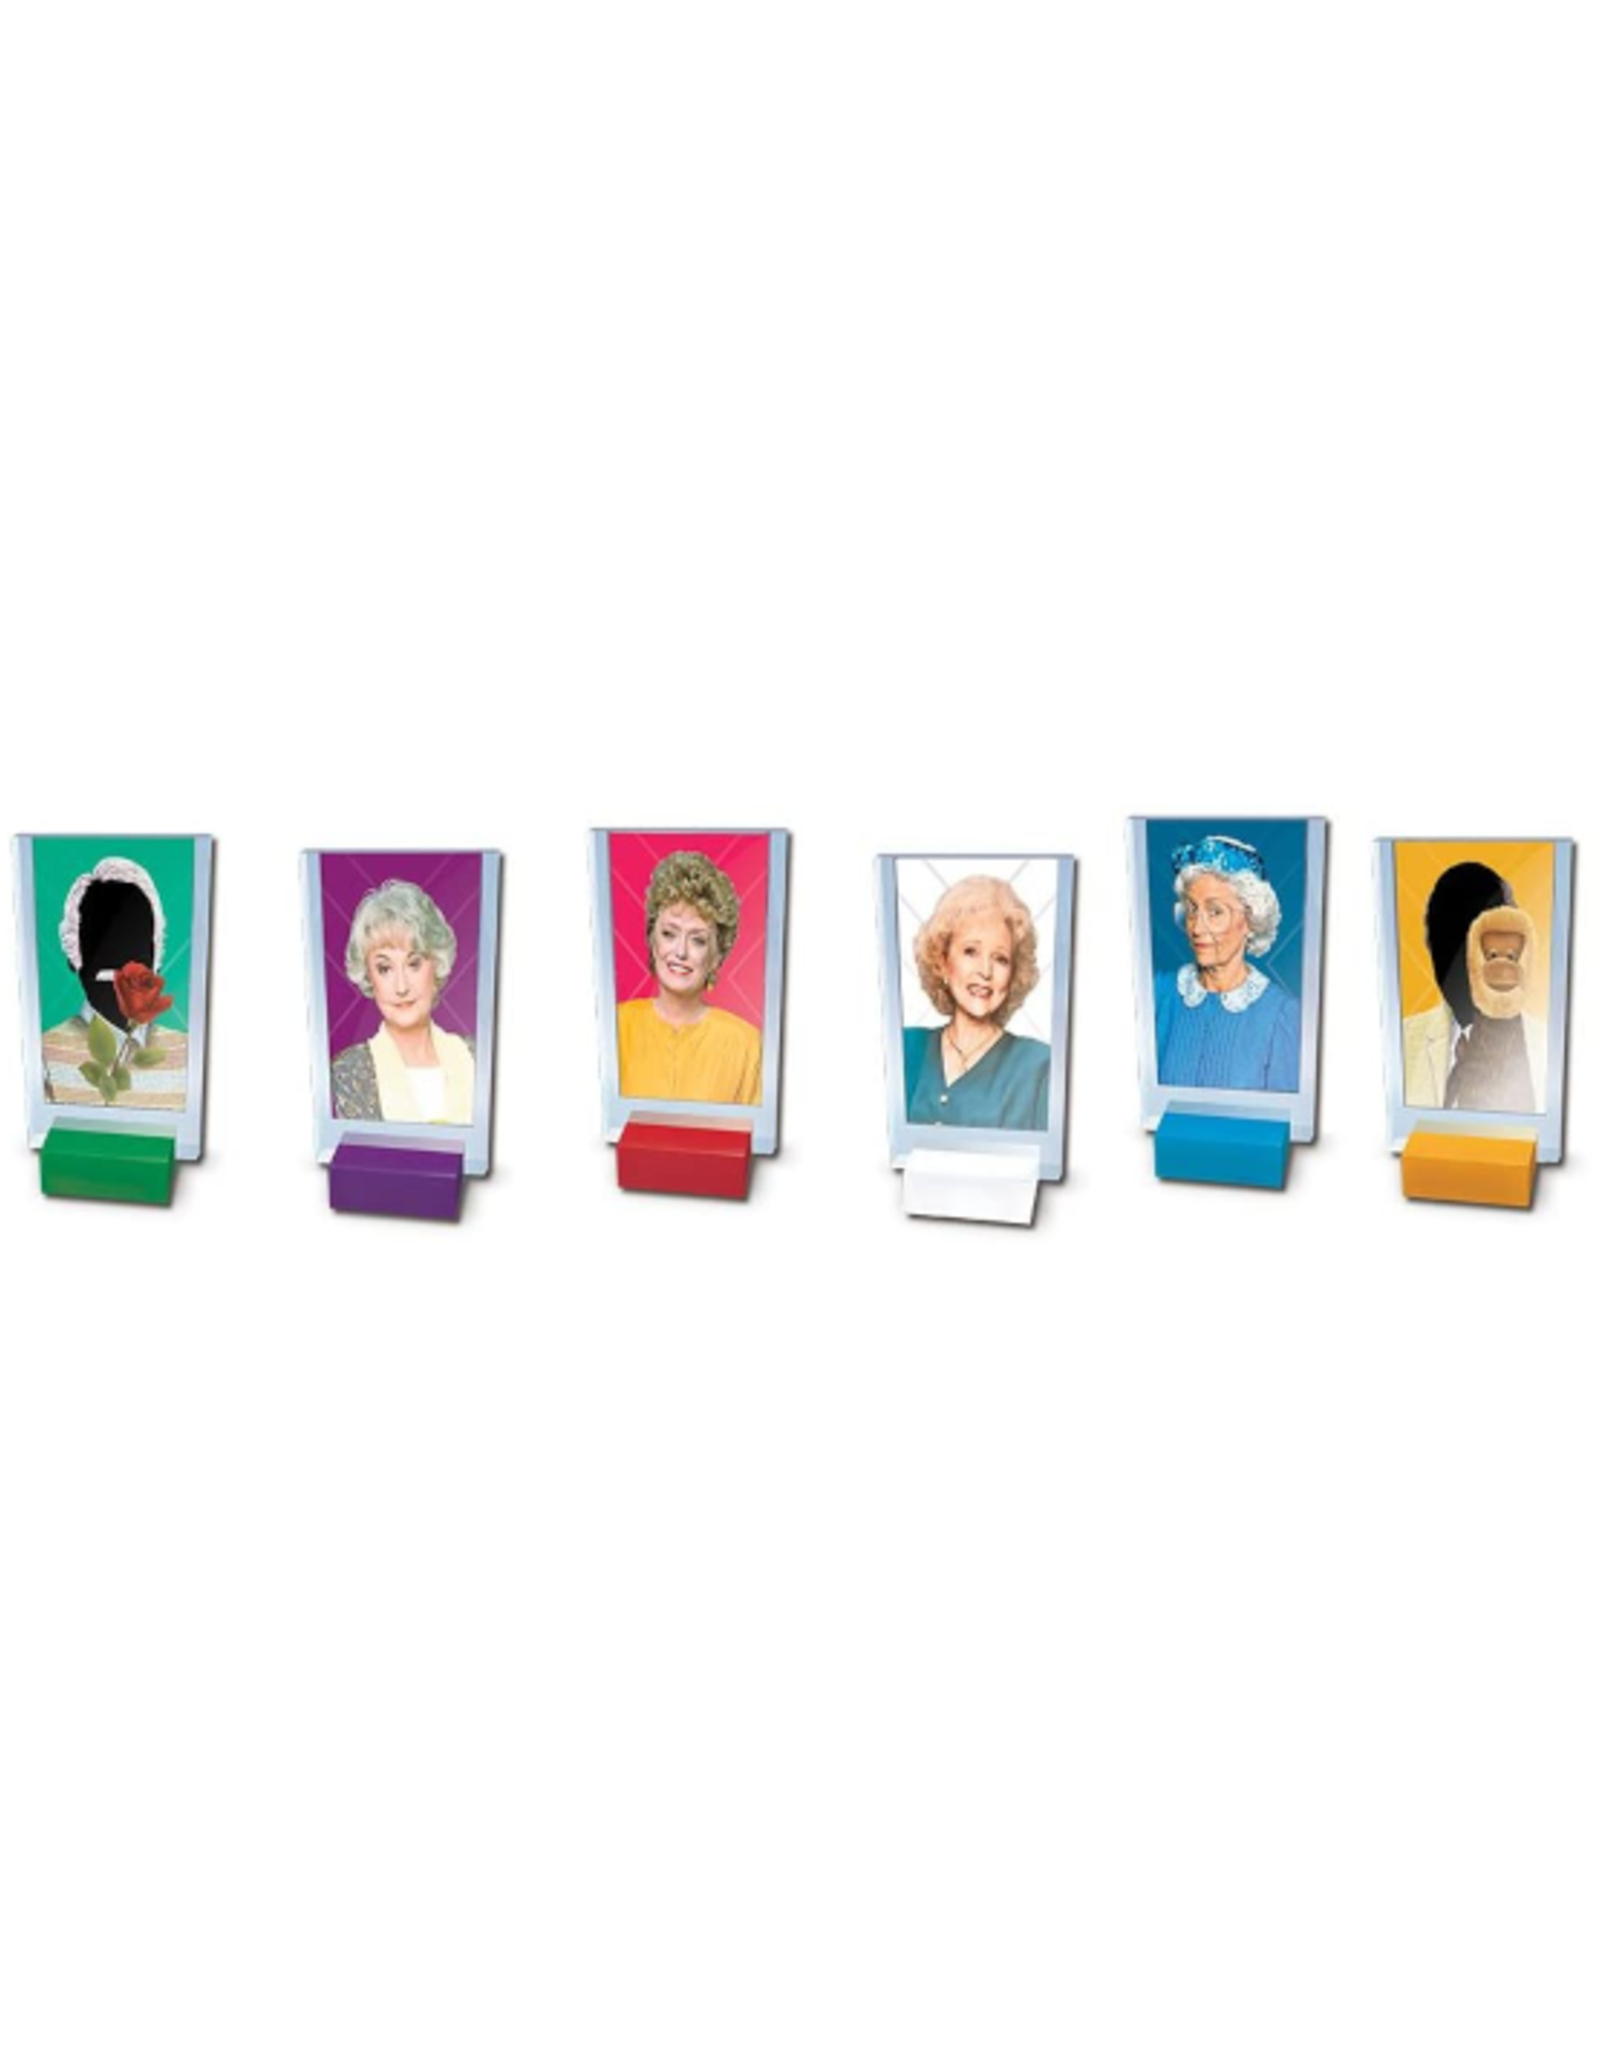 USAopoly Clue: The Golden Girls